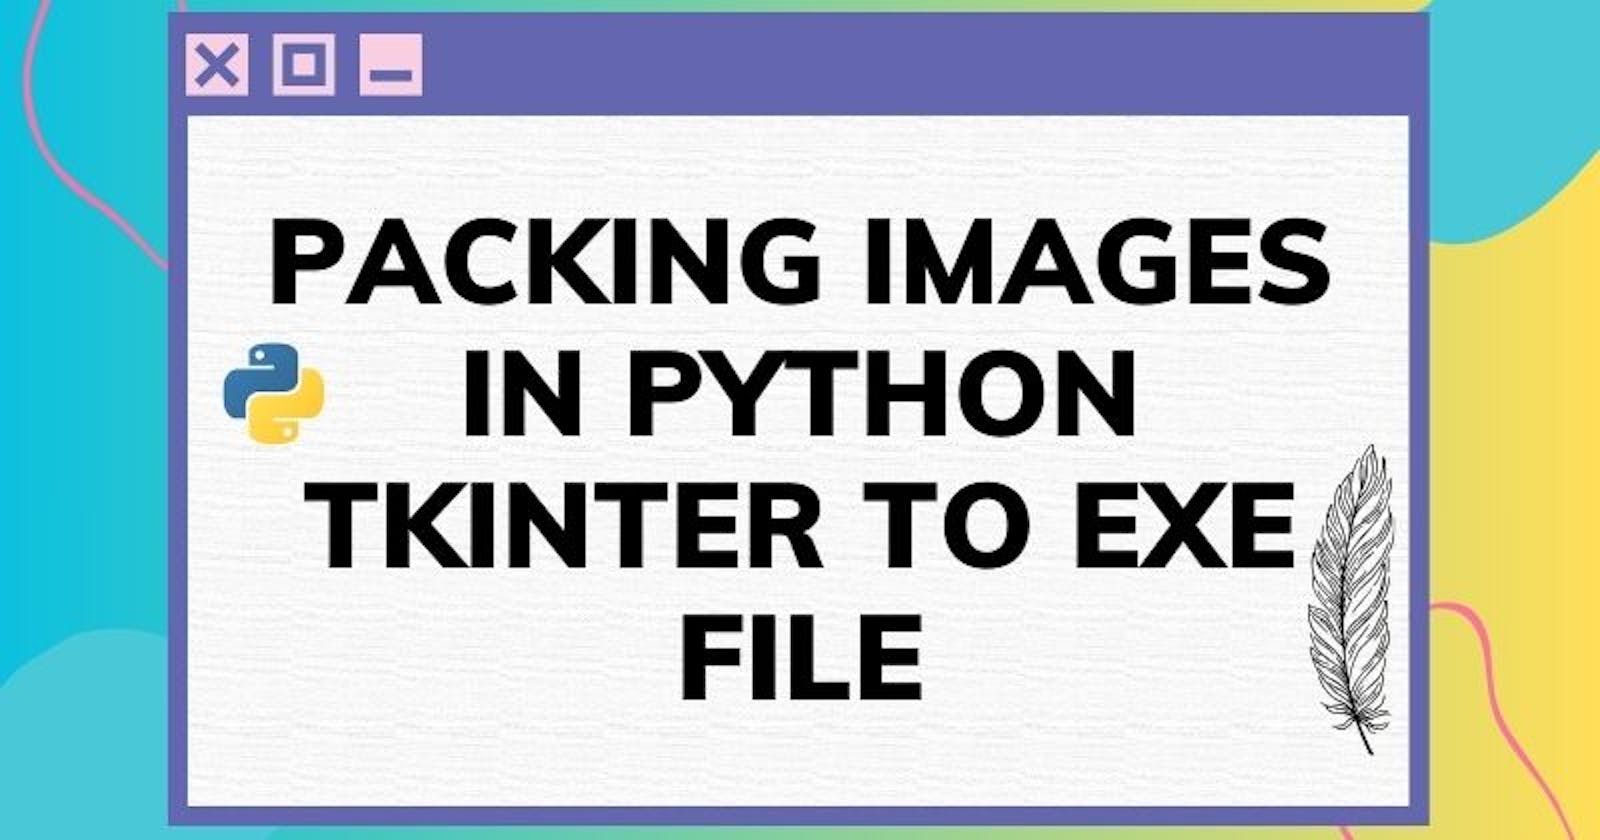 How to pack images in Python Tkinter file to an Exe file?